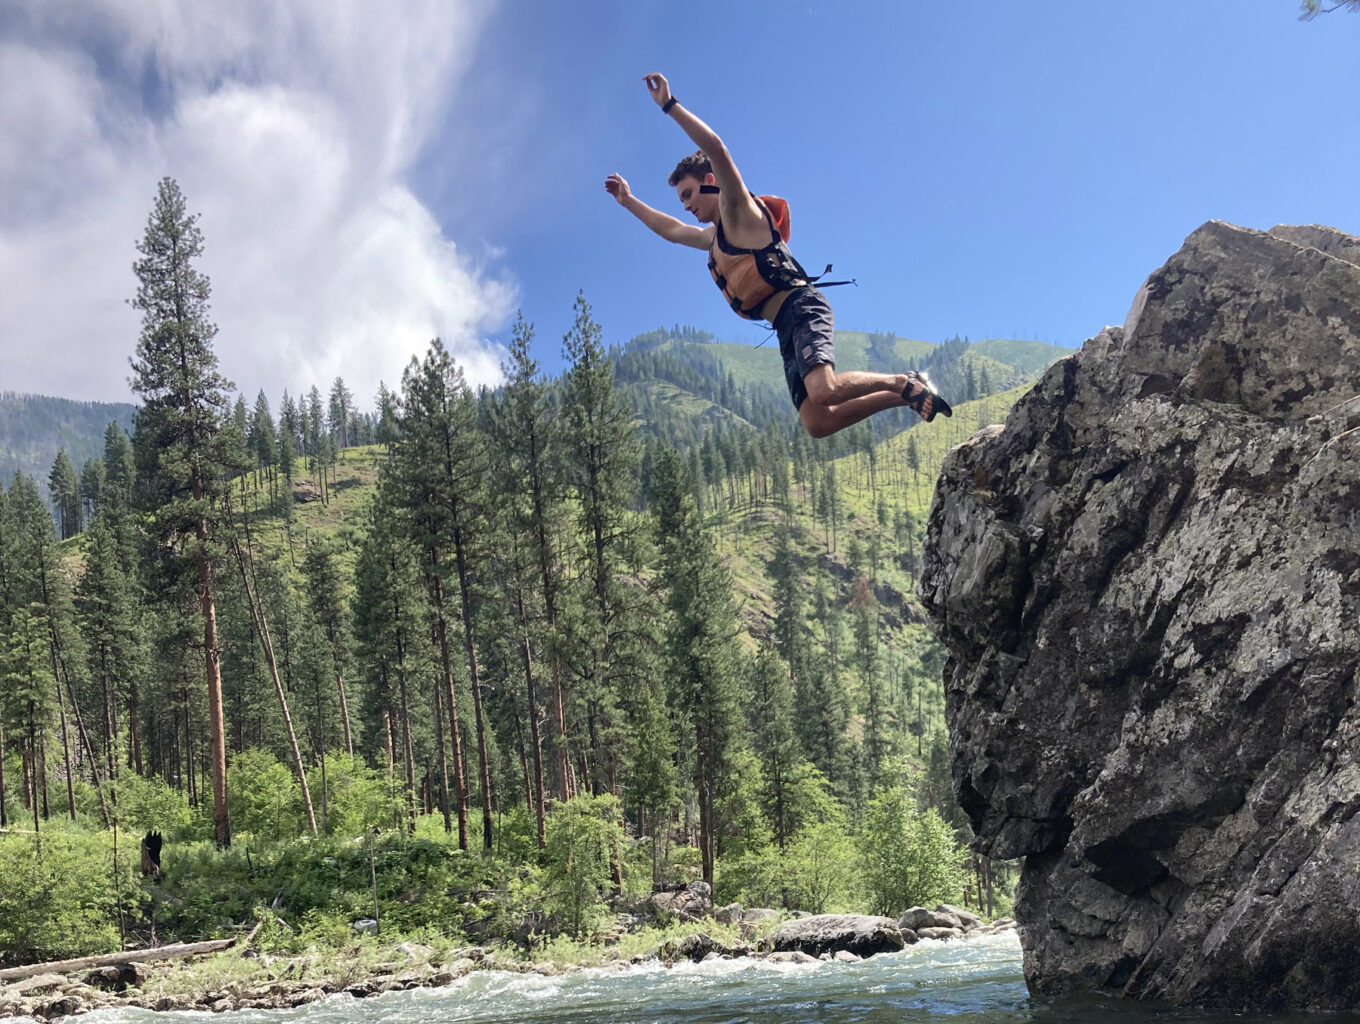 A teenager leaps from a rock into the river below.